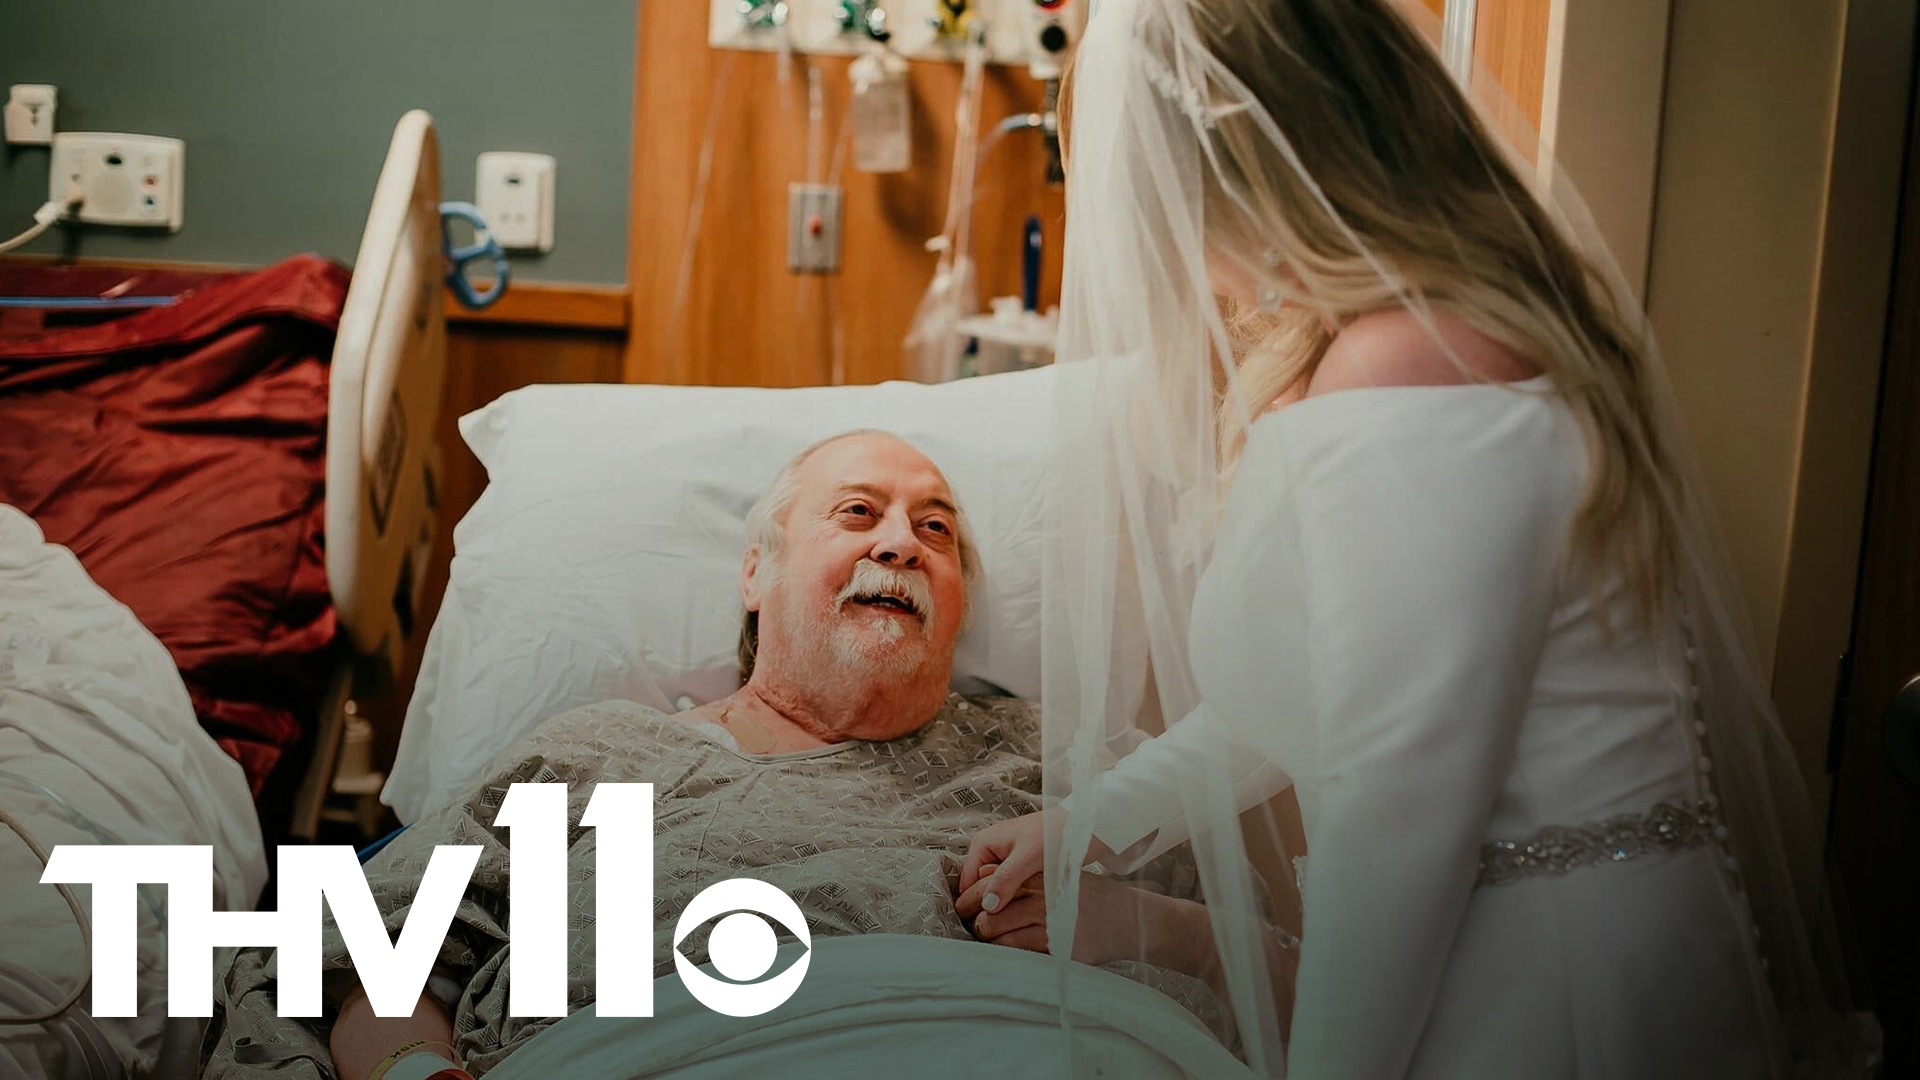 Allie Hall knew her grandfather would not be able to make special day in the upcoming weekend, so she made a special trip to show him her wedding dress.